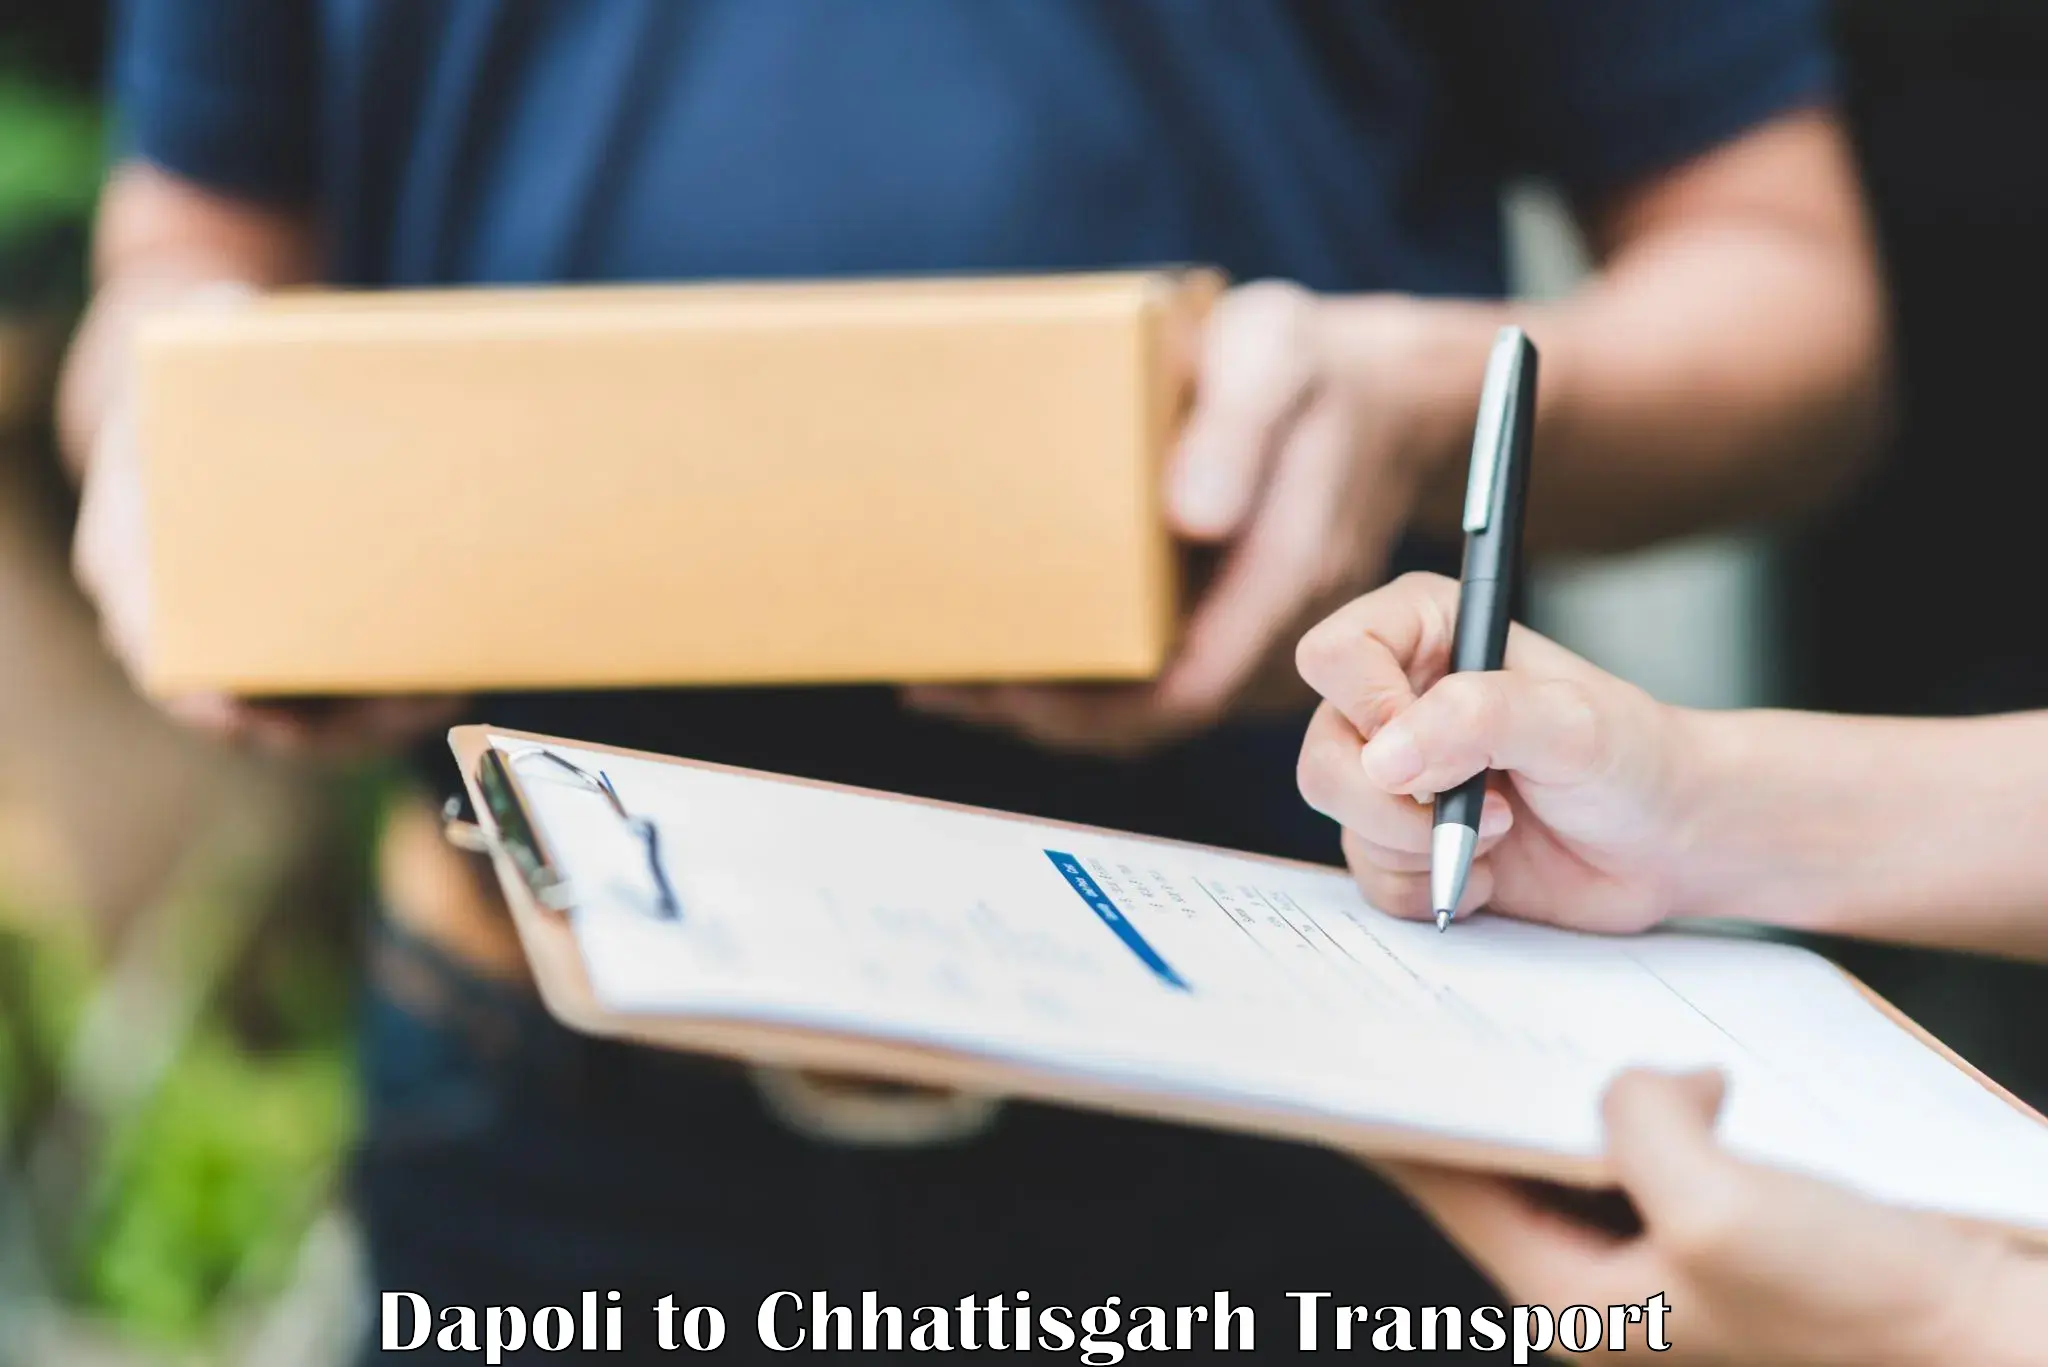 Air freight transport services in Dapoli to Lailunga